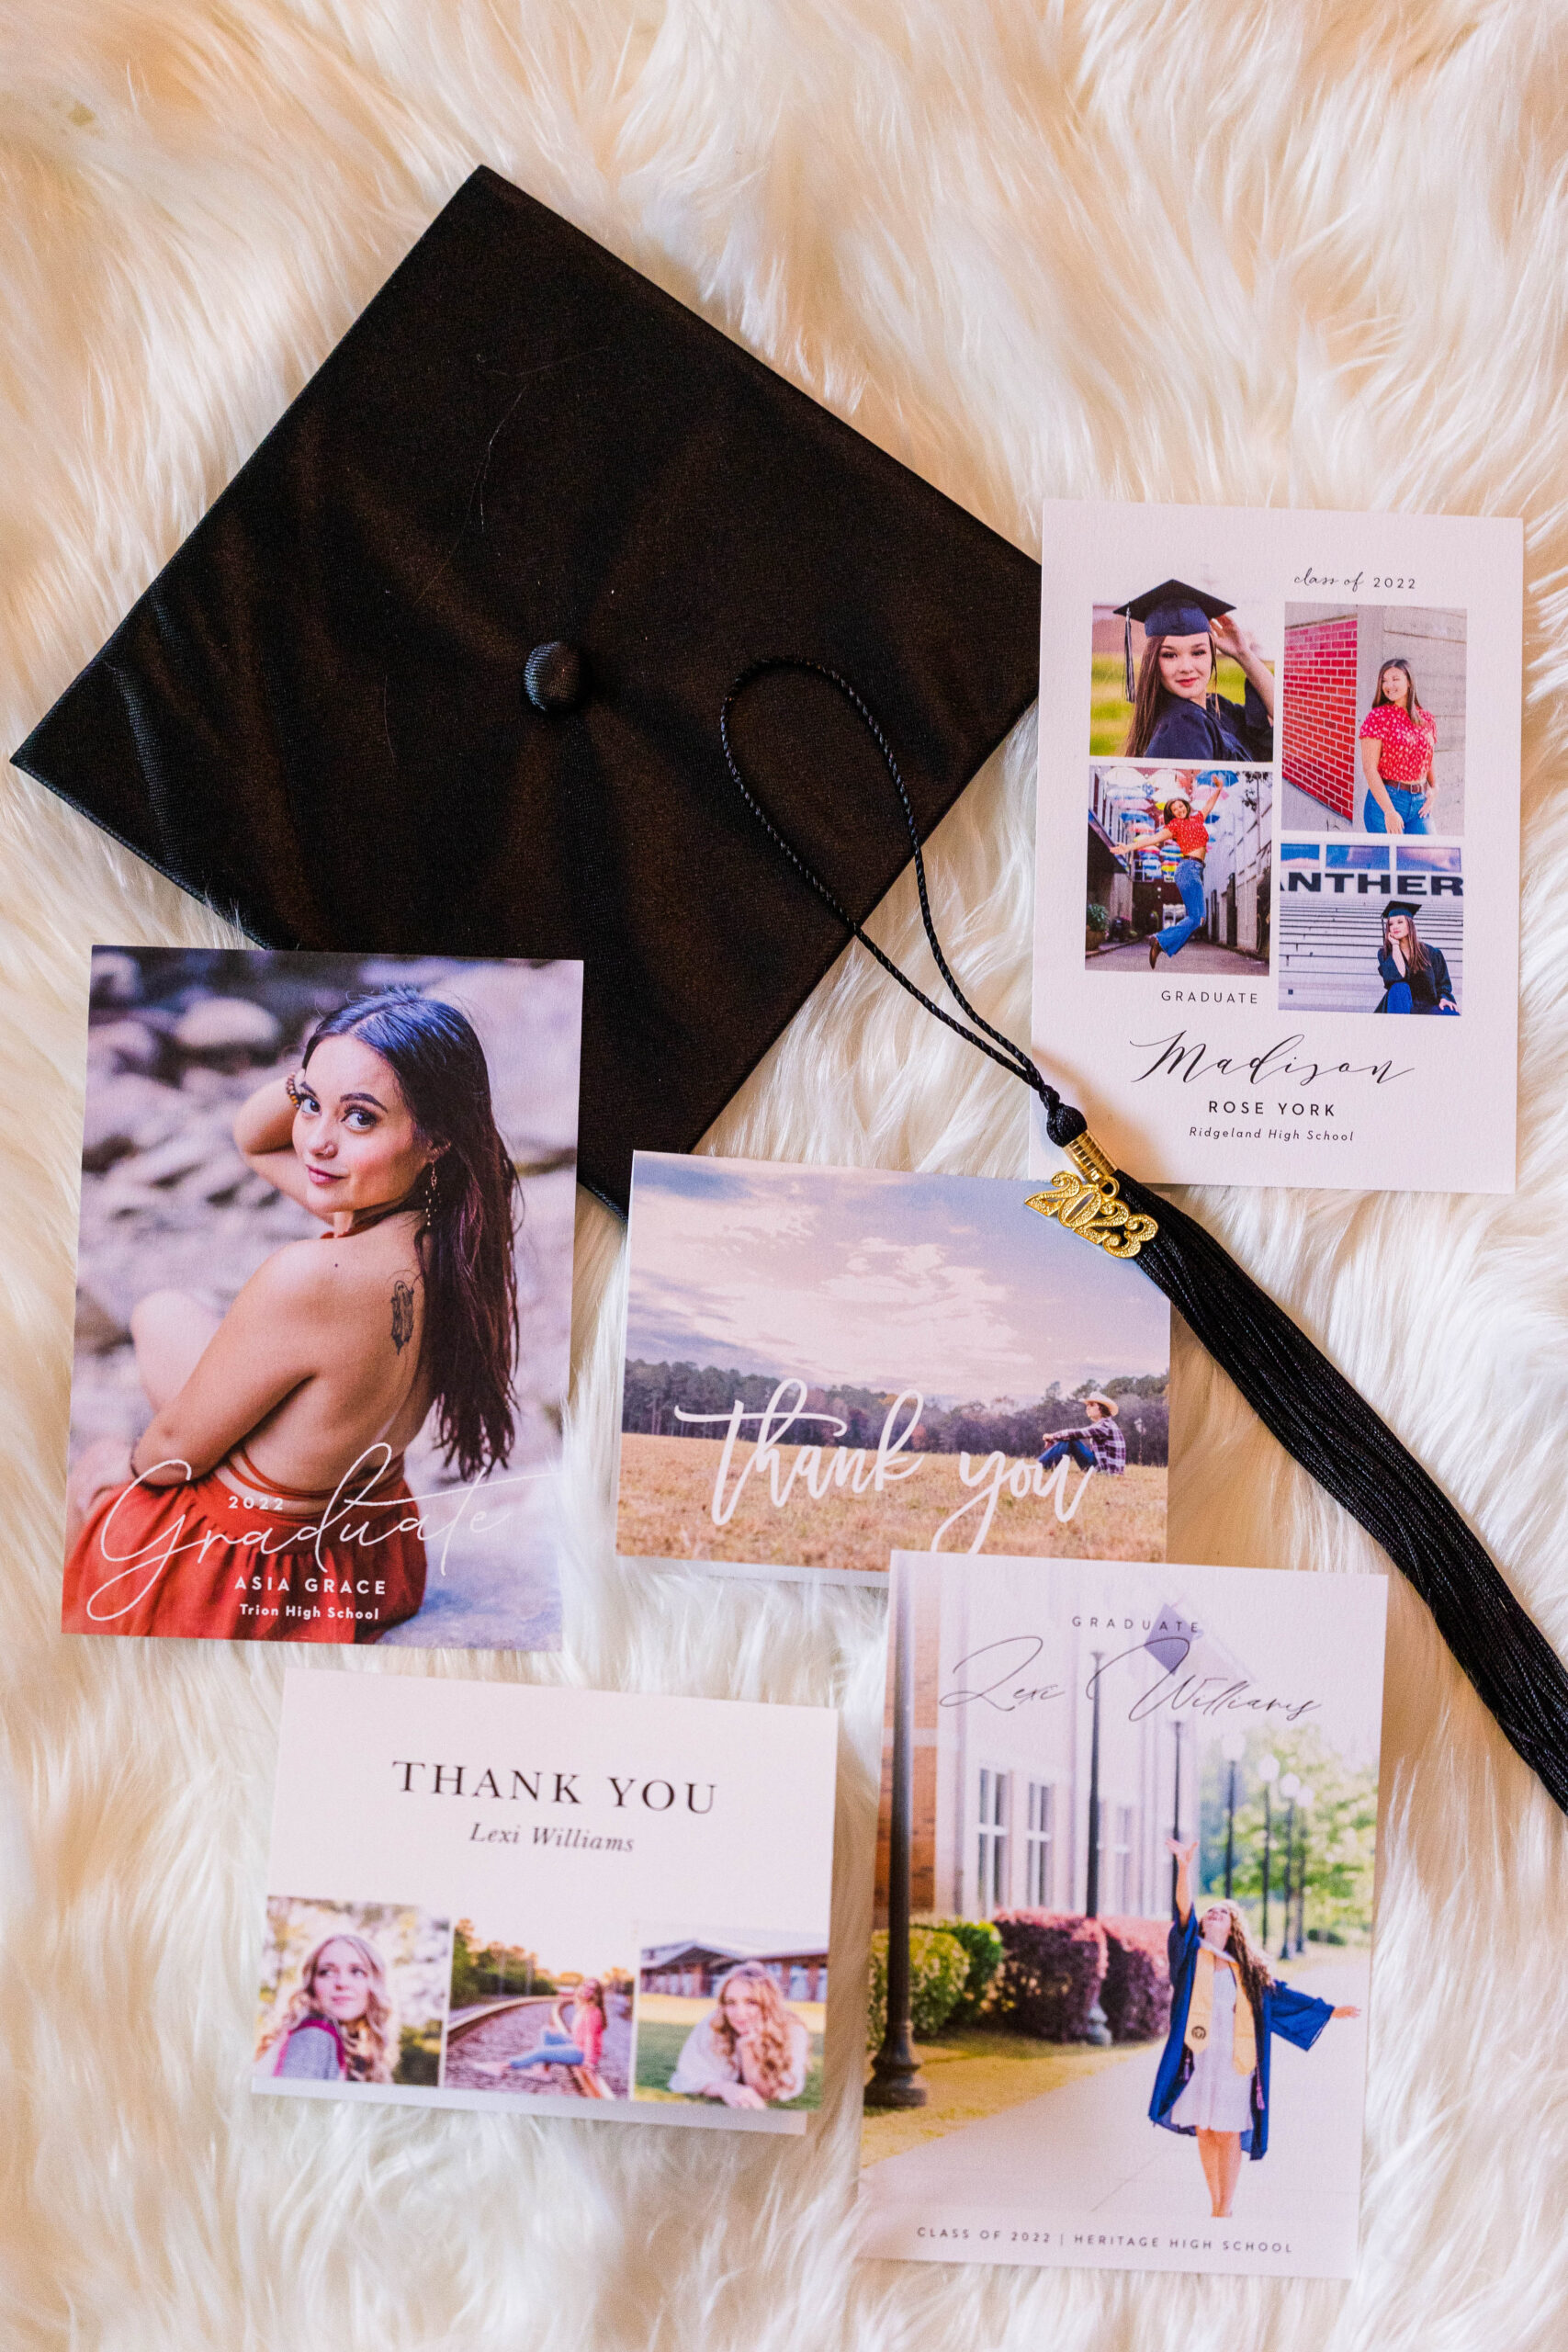 Samples of graduation announcements and graduation thank you cards from Basic Invite - photos of graduates by Elle Bea Photography.